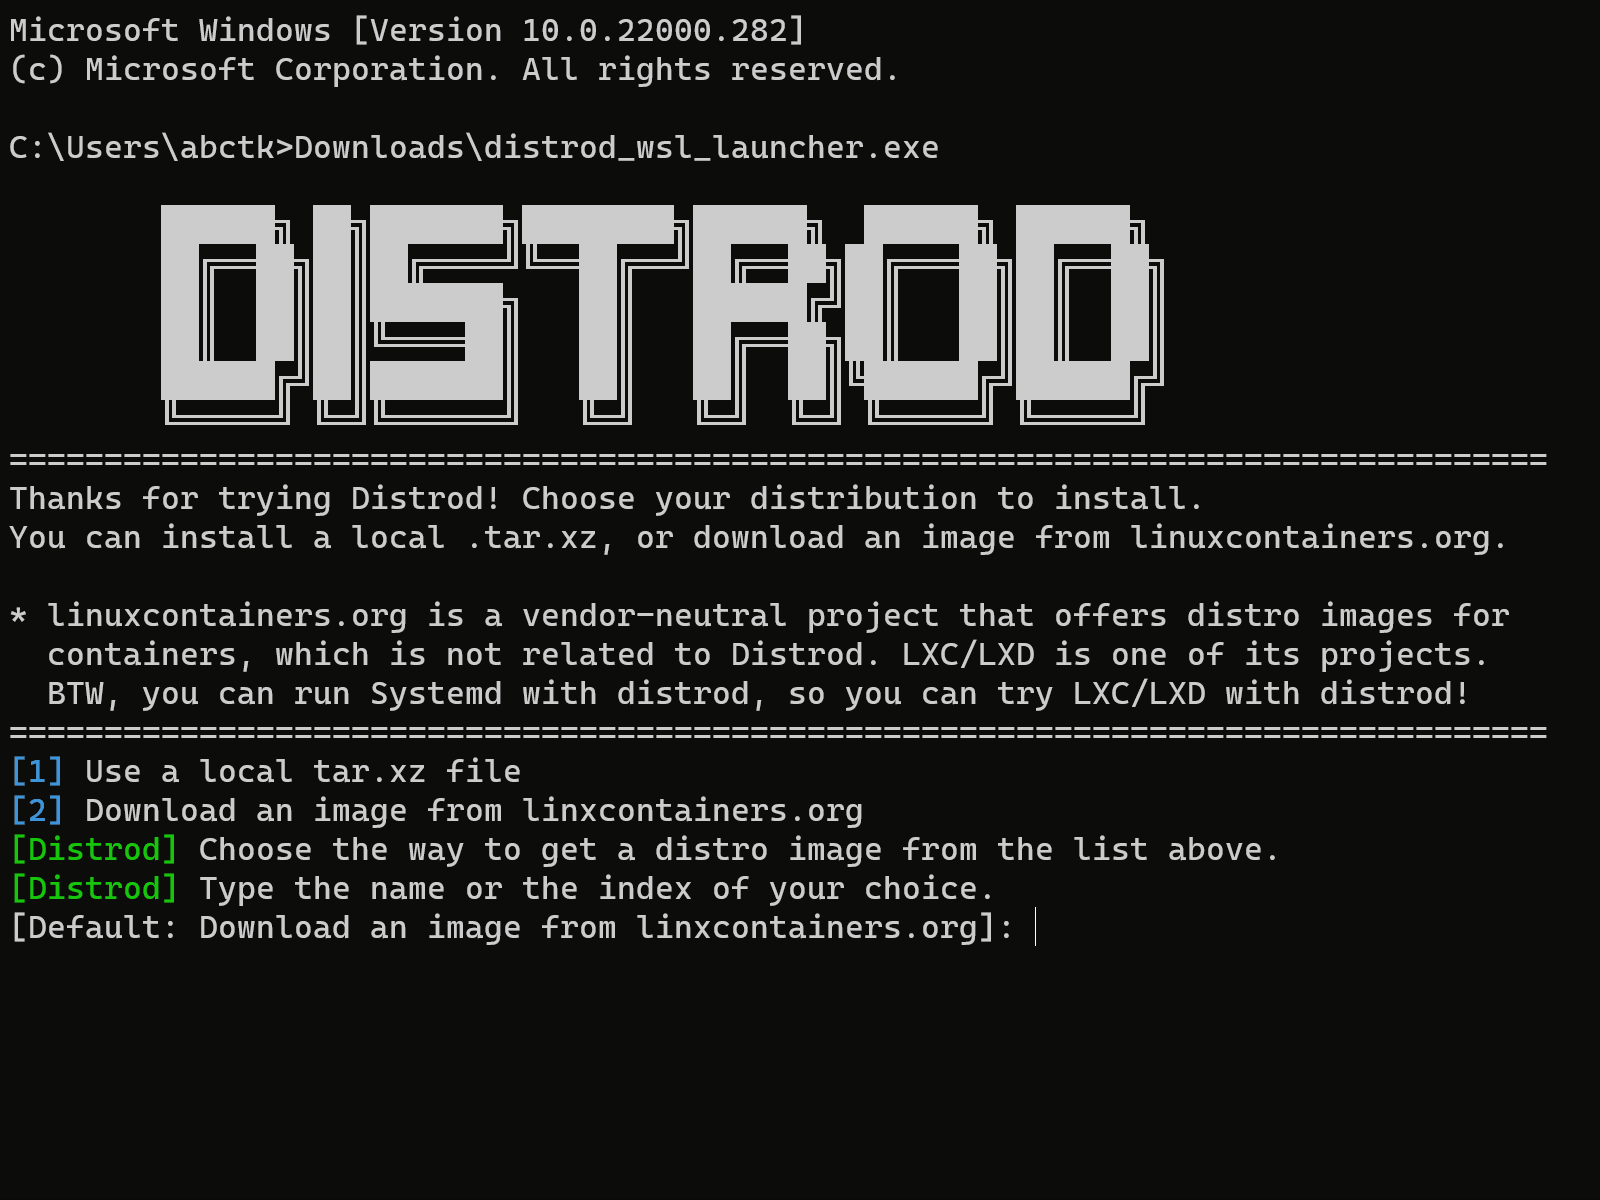 Distrod is installing Arch Linux